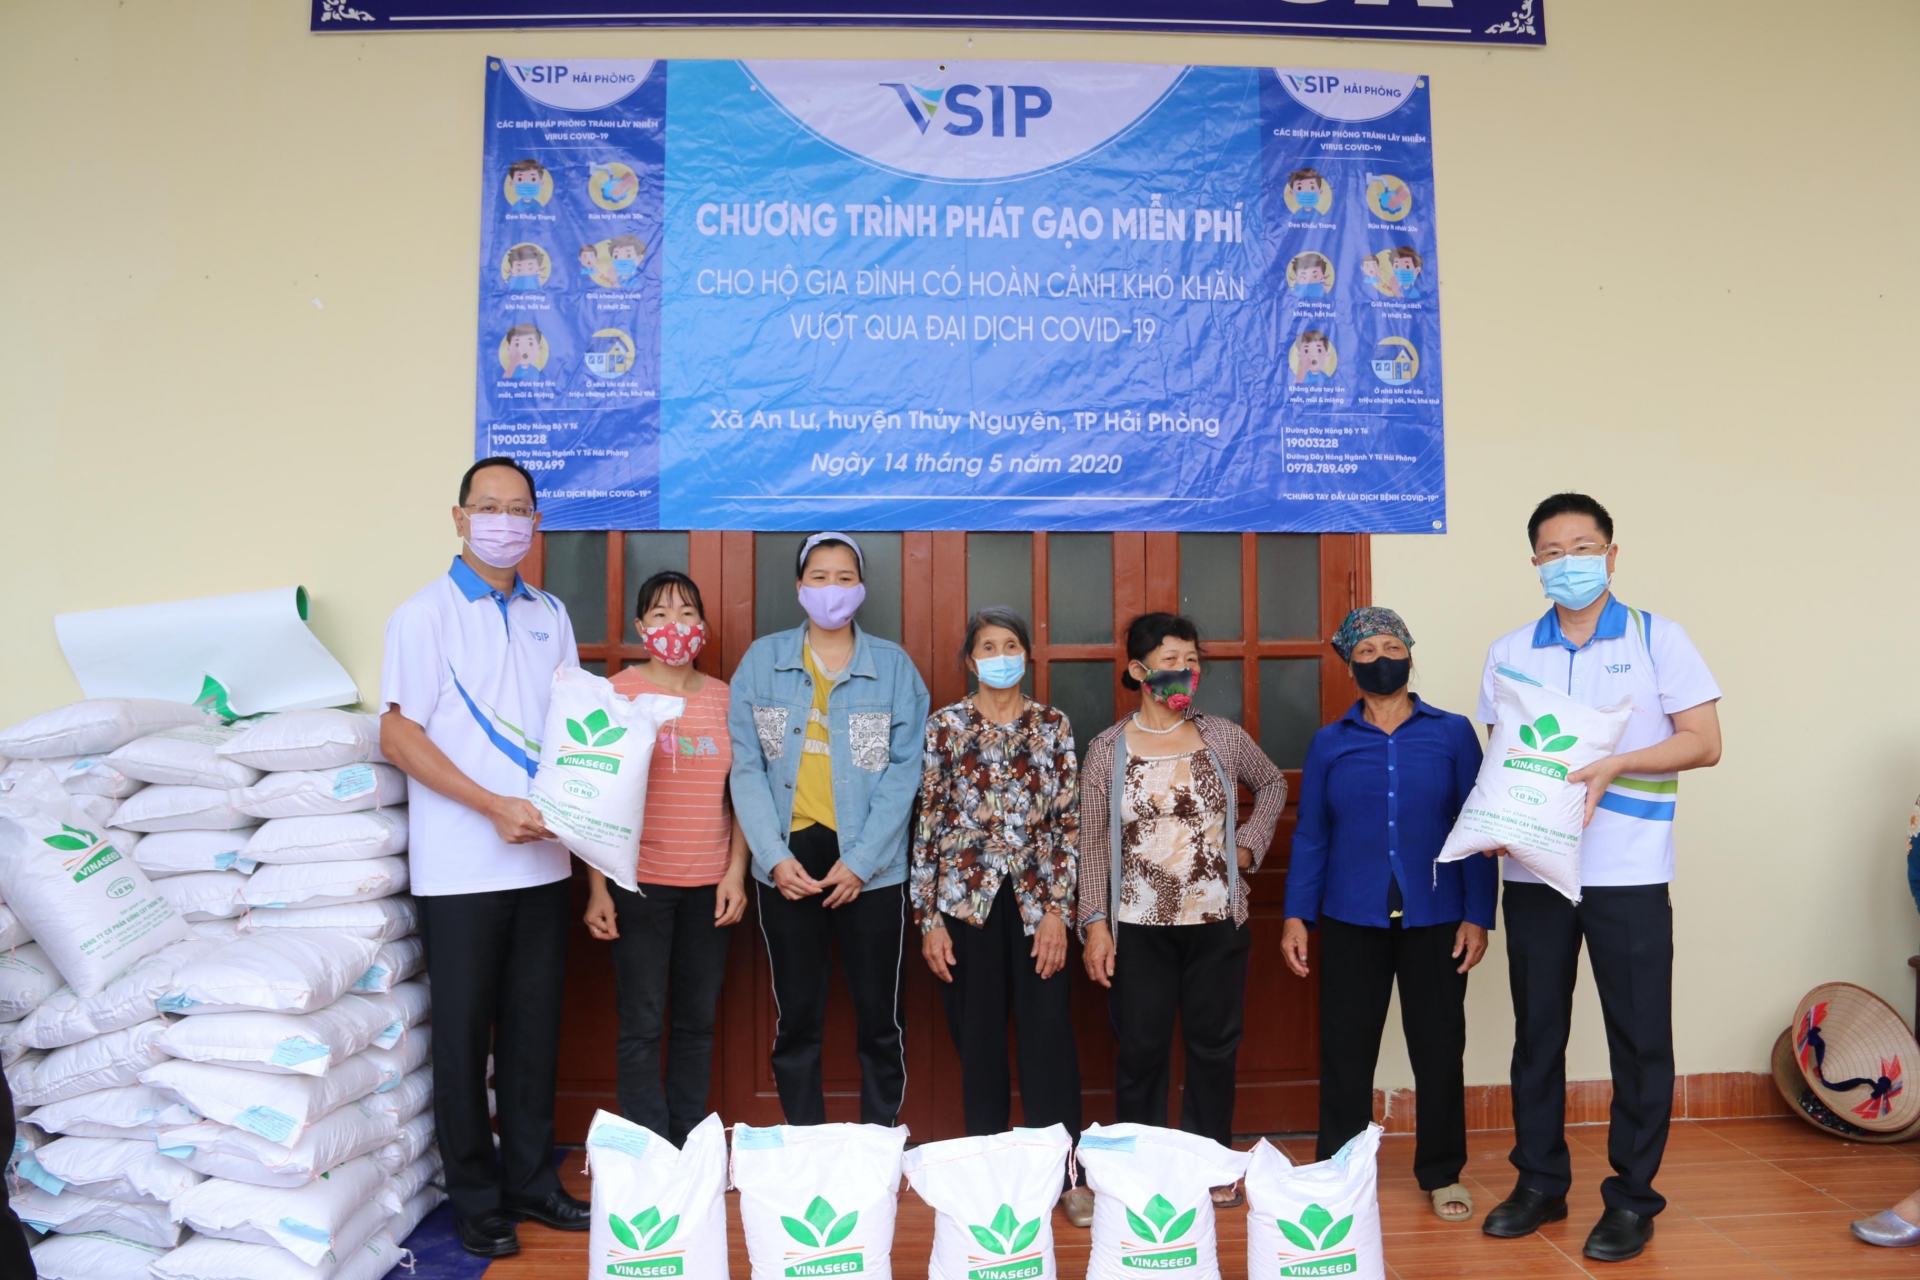 vsip sets up rice atms for workers